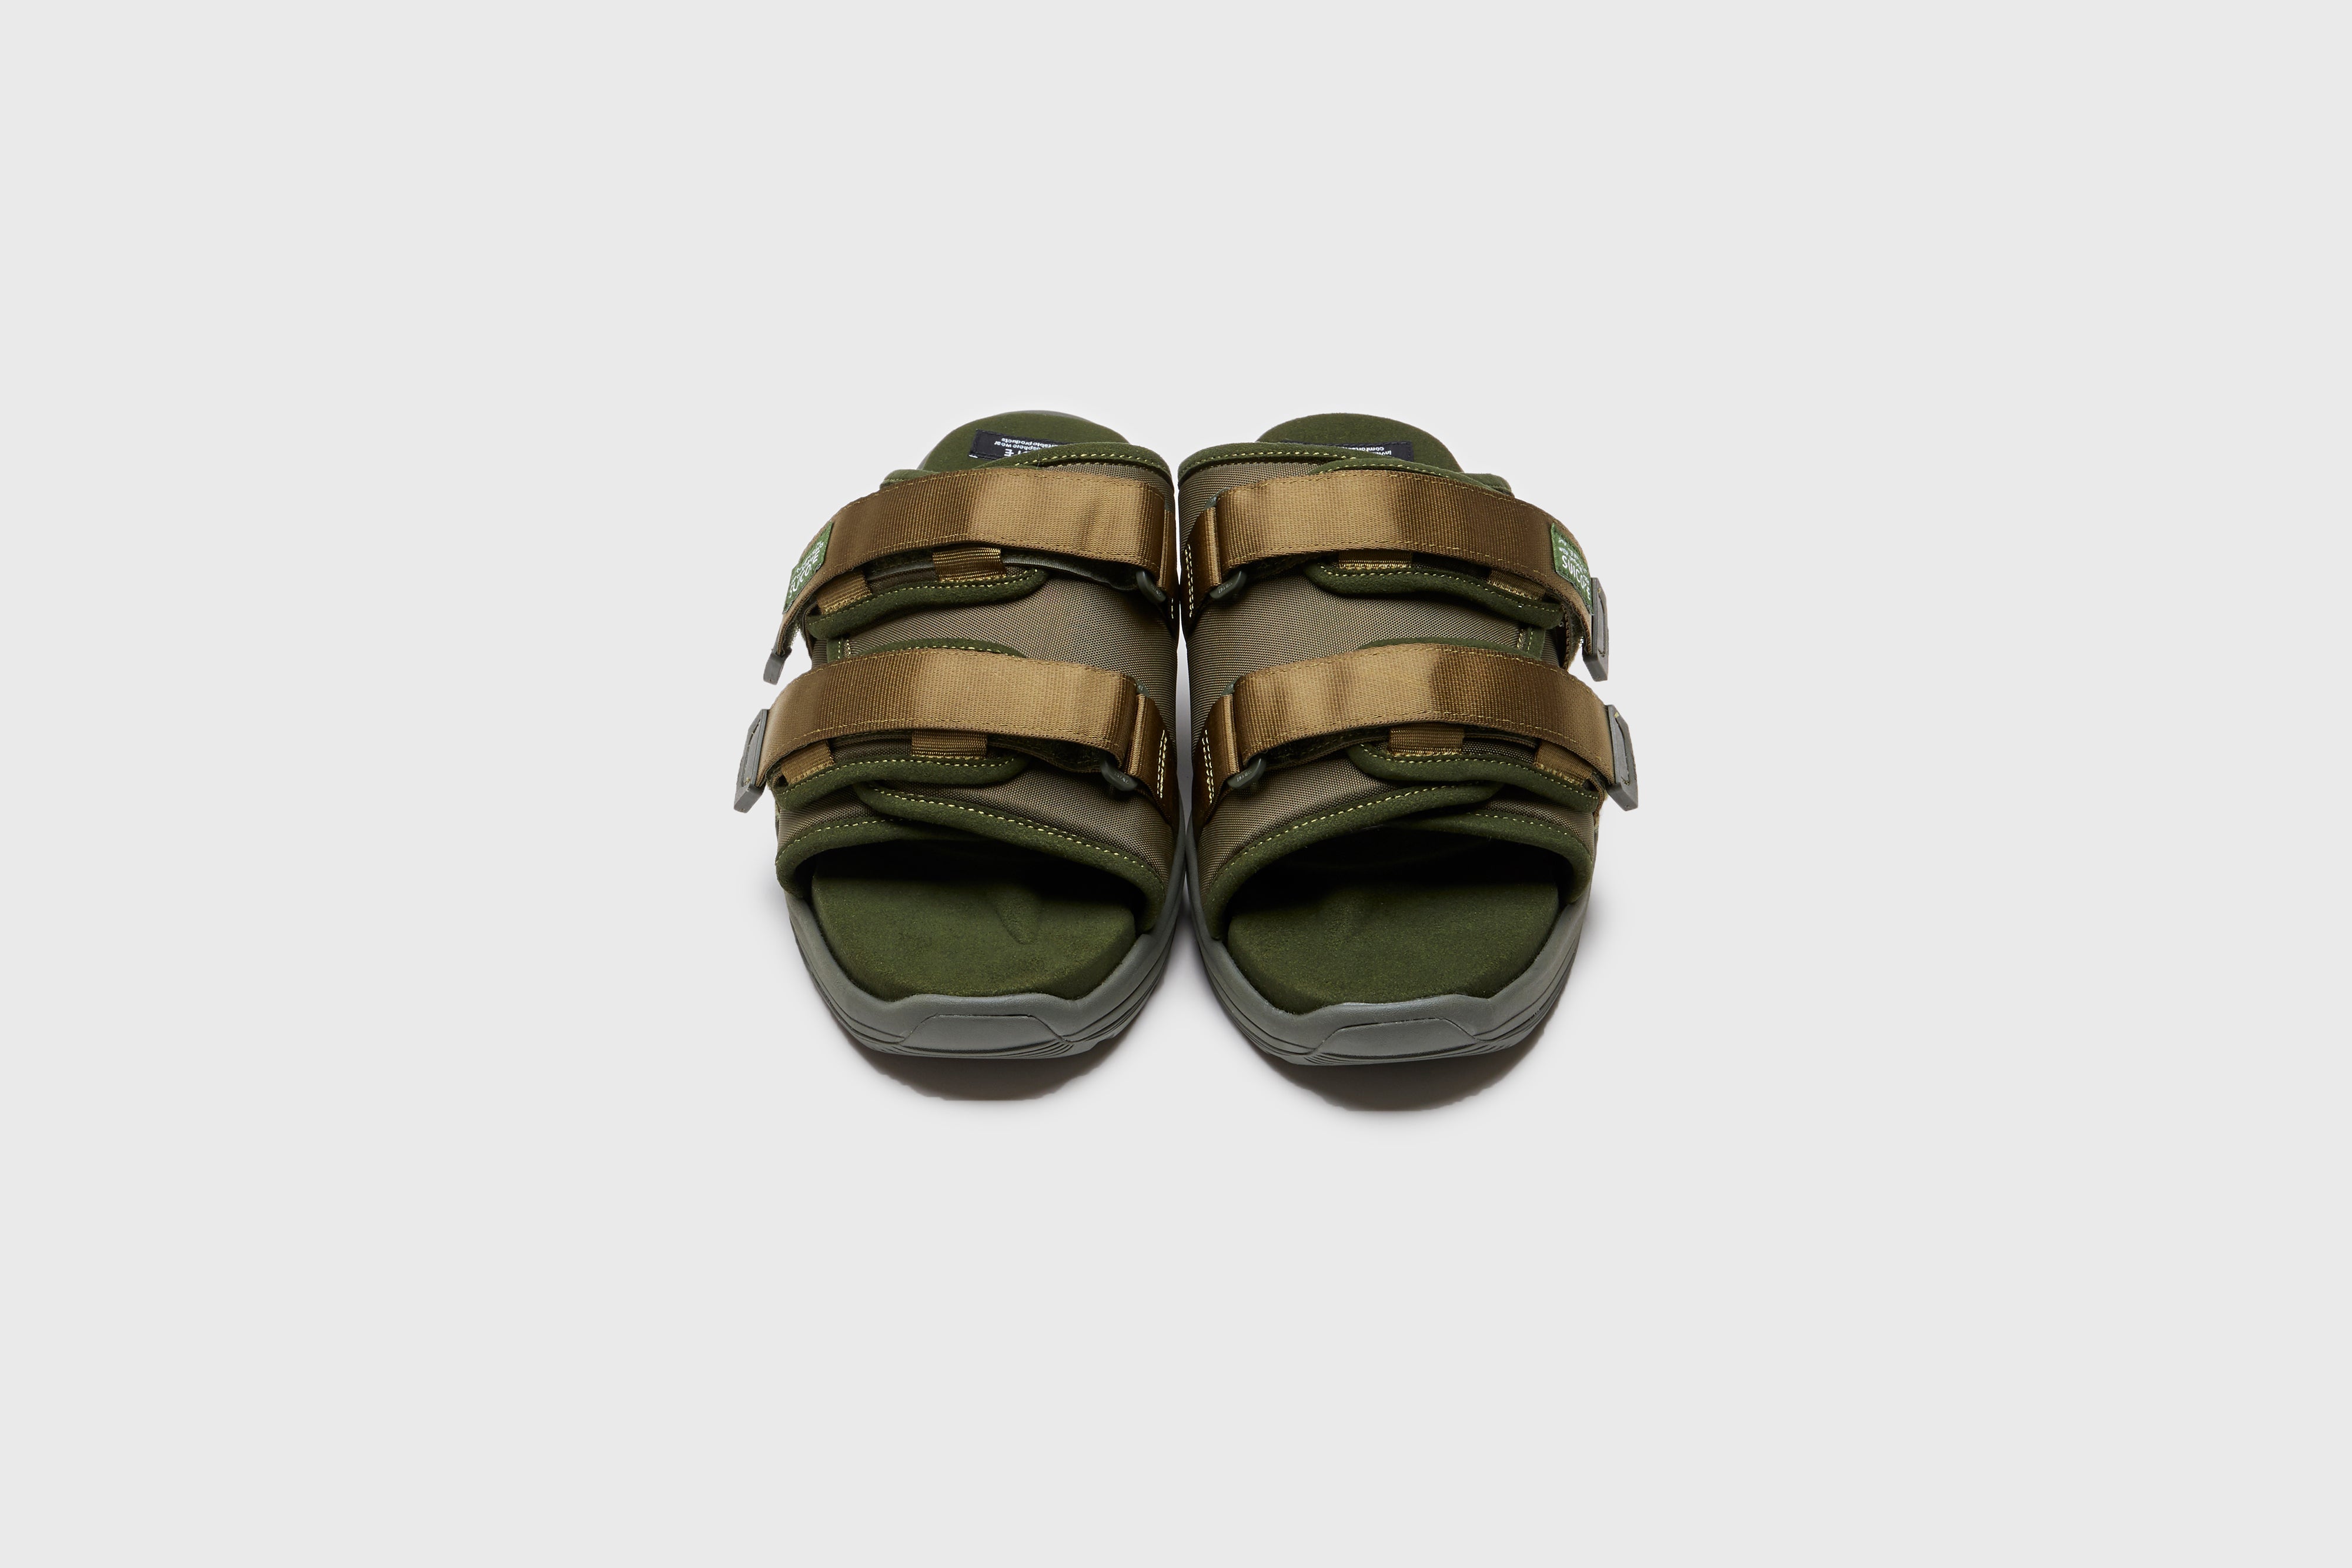 SUICOKE MOTO-Run slides with olive nylon upper, olive midsole and sole, strap and logo patch. From Spring/Summer 2023 collection on eightywingold Web Store, an official partner of SUICOKE. OG-332 OLIVE